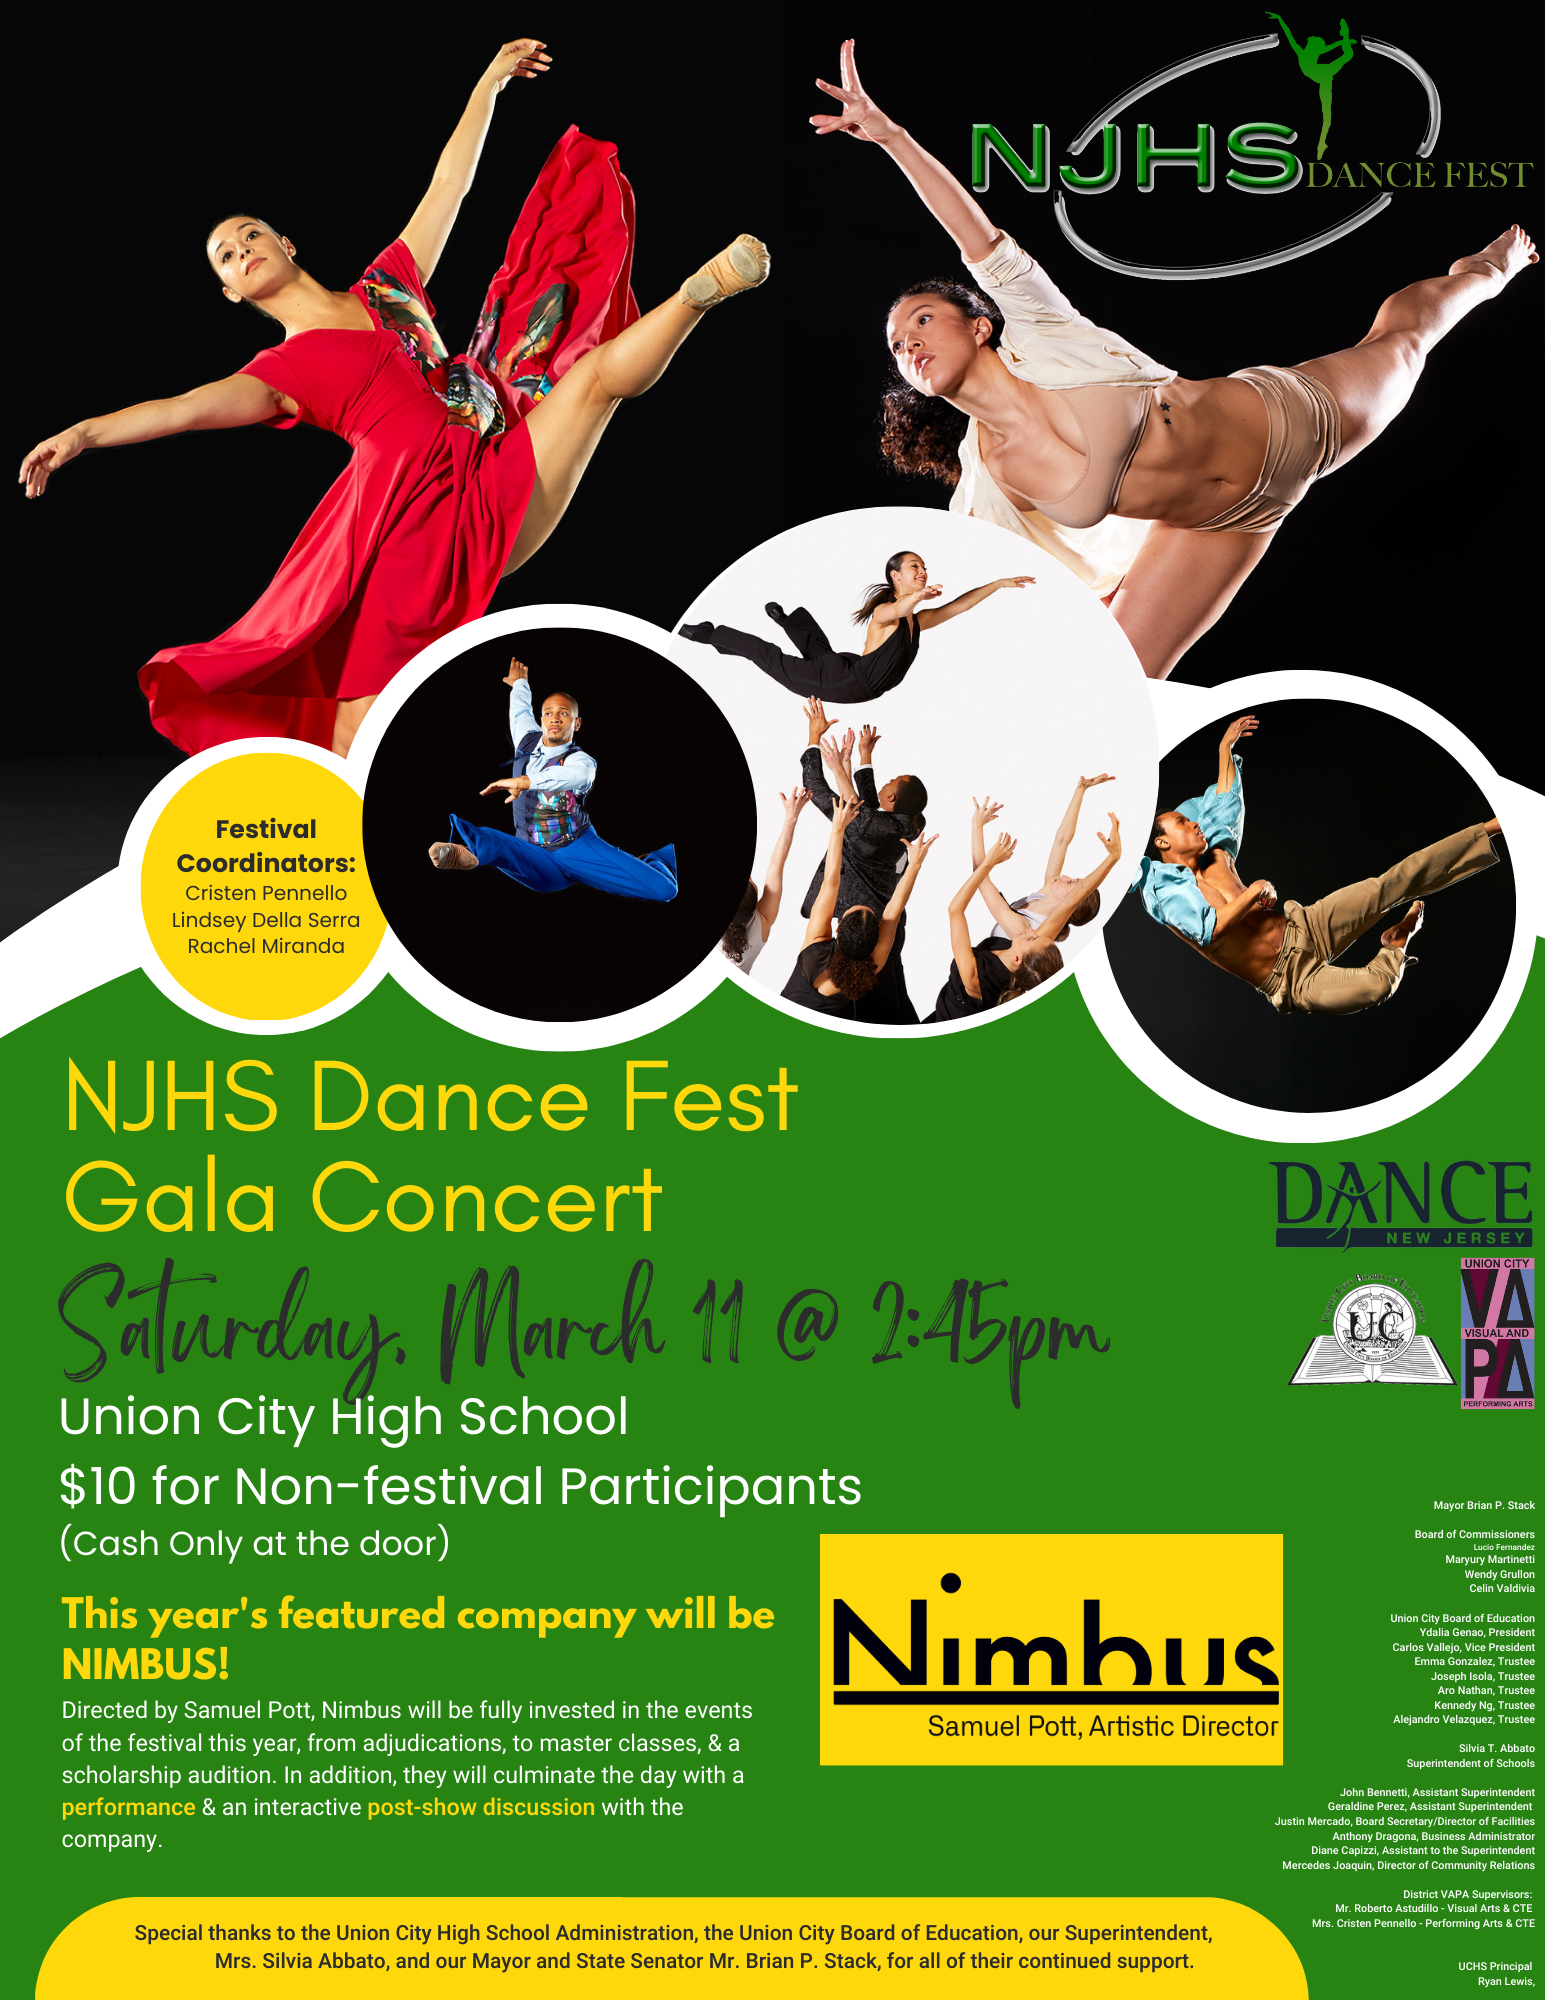 The NJHS Dance Fest Reminder For Saturday March 11, 2023